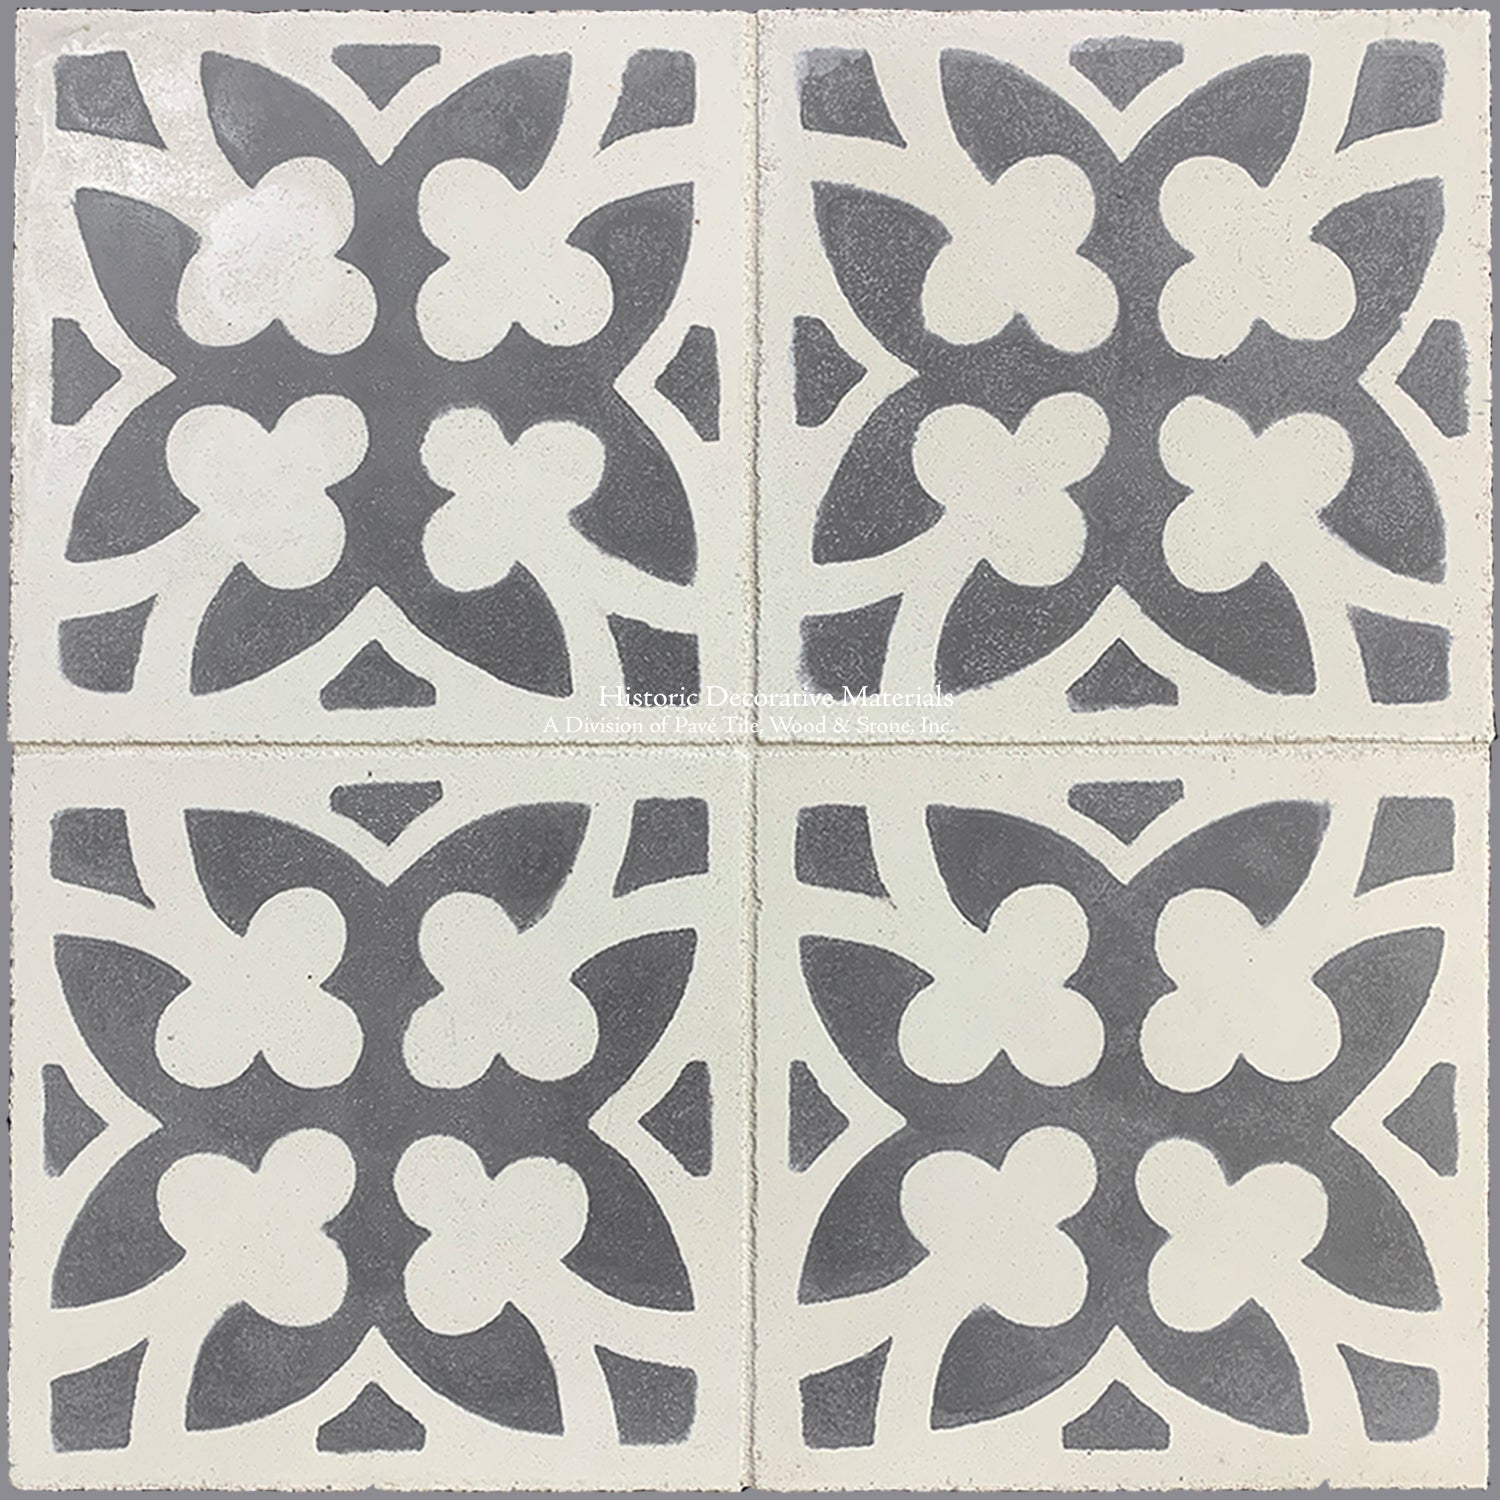 Catalan Farmhouse 1850 Antiqued Cement Tile Collection - Lucky Clover:  Stone + Olde White